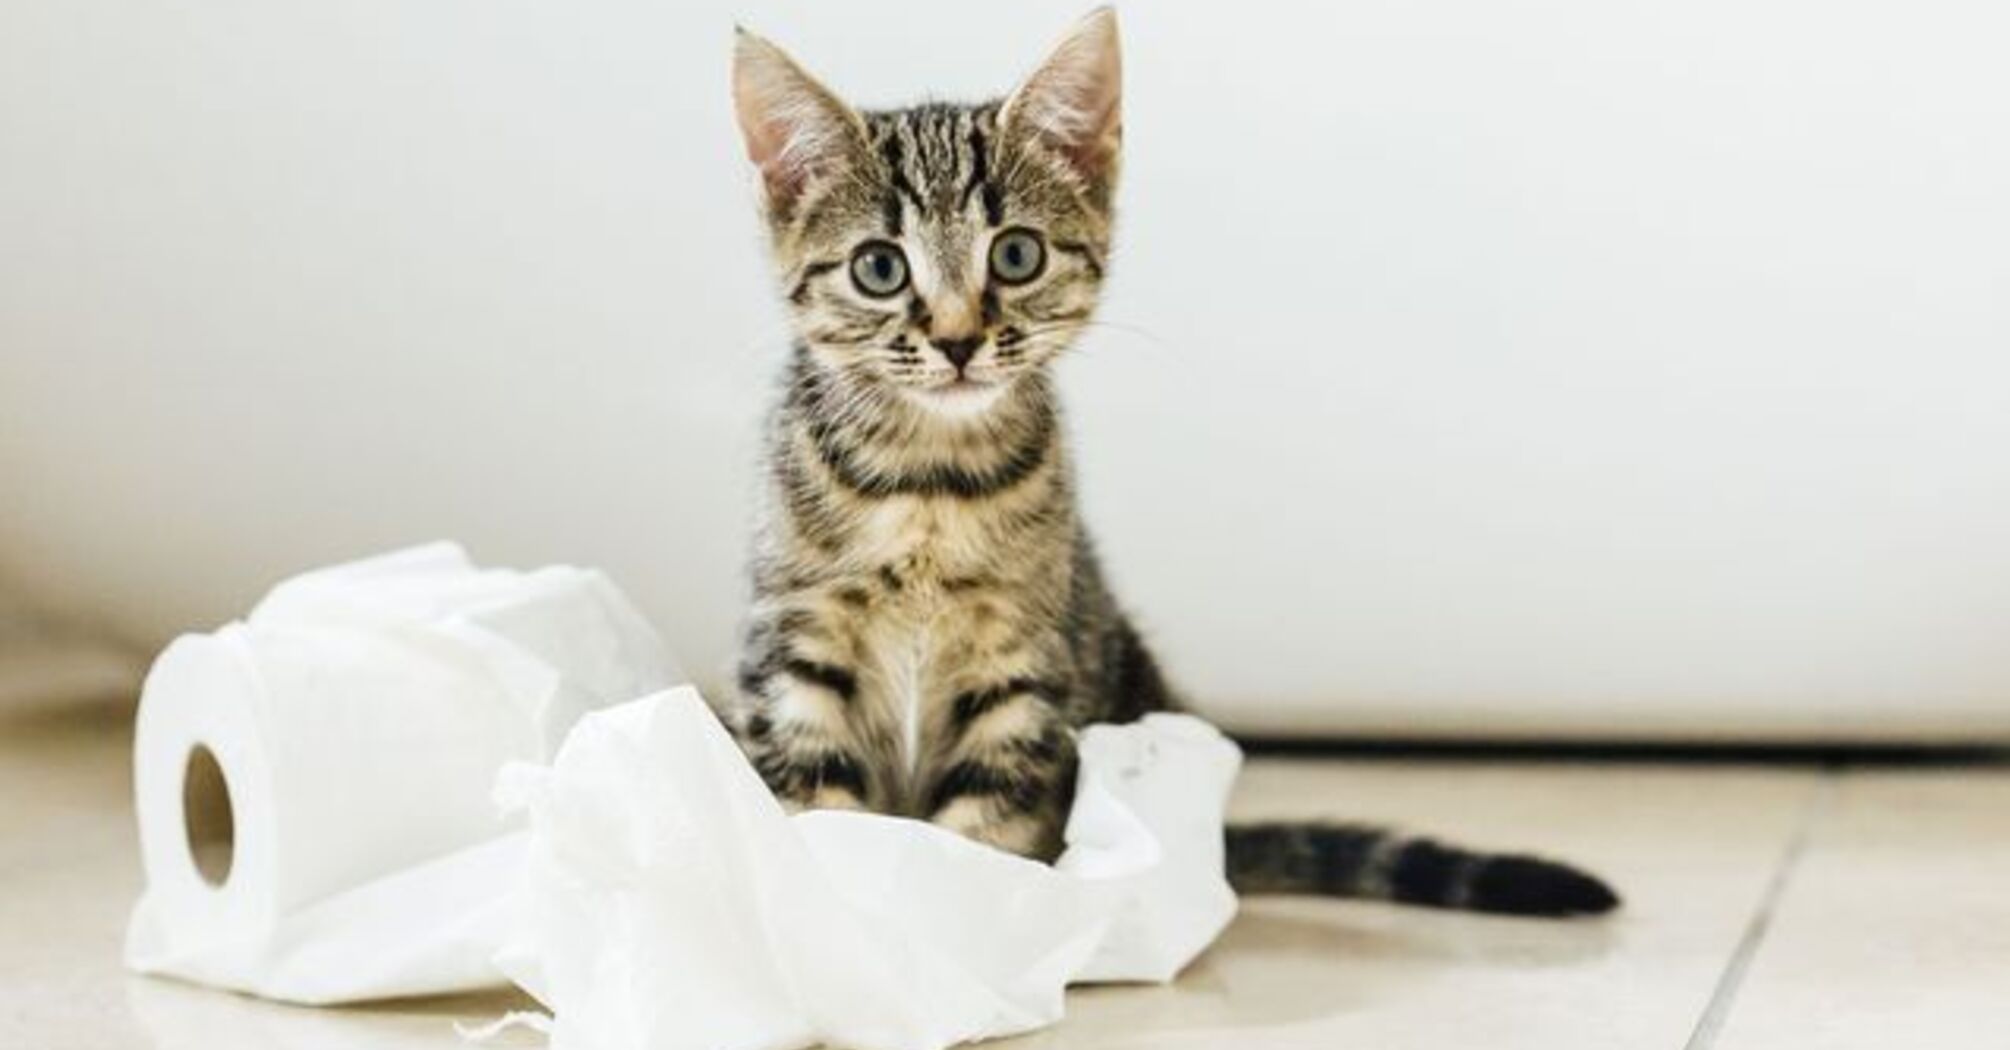 How to get rid of cat odor in the house